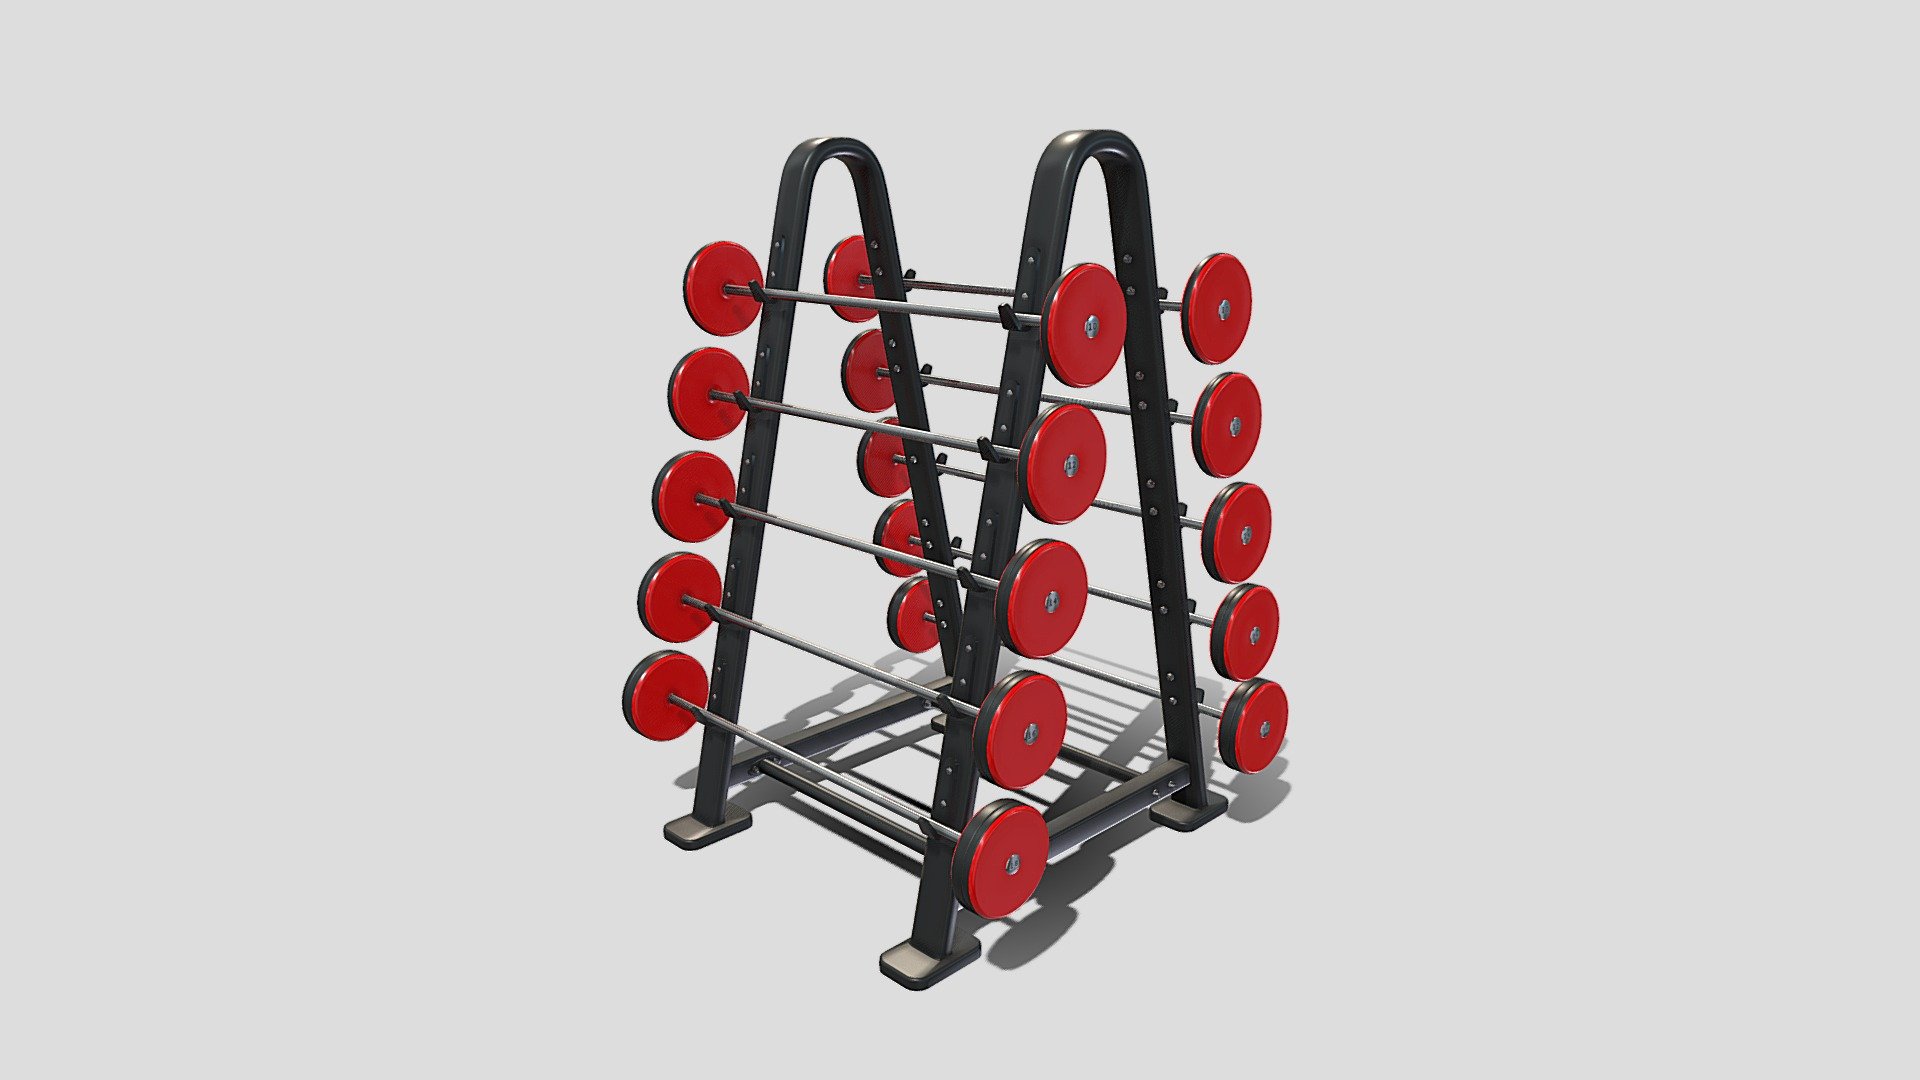 Gym machine 3d model built to real size, rendered with Cycles in Blender, as per seen on attached images. 

File formats:
-.blend, rendered with cycles, as seen in the images;
-.obj, with materials applied;
-.dae, with materials applied;
-.fbx, with materials applied;
-.stl;

Files come named appropriately and split by file format.

3D Software:
The 3D model was originally created in Blender 3.1 and rendered with Cycles.

Materials and textures:
The models have materials applied in all formats, and are ready to import and render.
Materials are image based using PBR, the model comes with five 4k png image textures.

Preview scenes:
The preview images are rendered in Blender using its built-in render engine &lsquo;Cycles'.
Note that the blend files come directly with the rendering scene included and the render command will generate the exact result as seen in previews.

General:
The models are built mostly out of quads.

For any problems please feel free to contact me.

Don't forget to rate and enjoy! - Barbell Rack Double - Buy Royalty Free 3D model by dragosburian 3d model